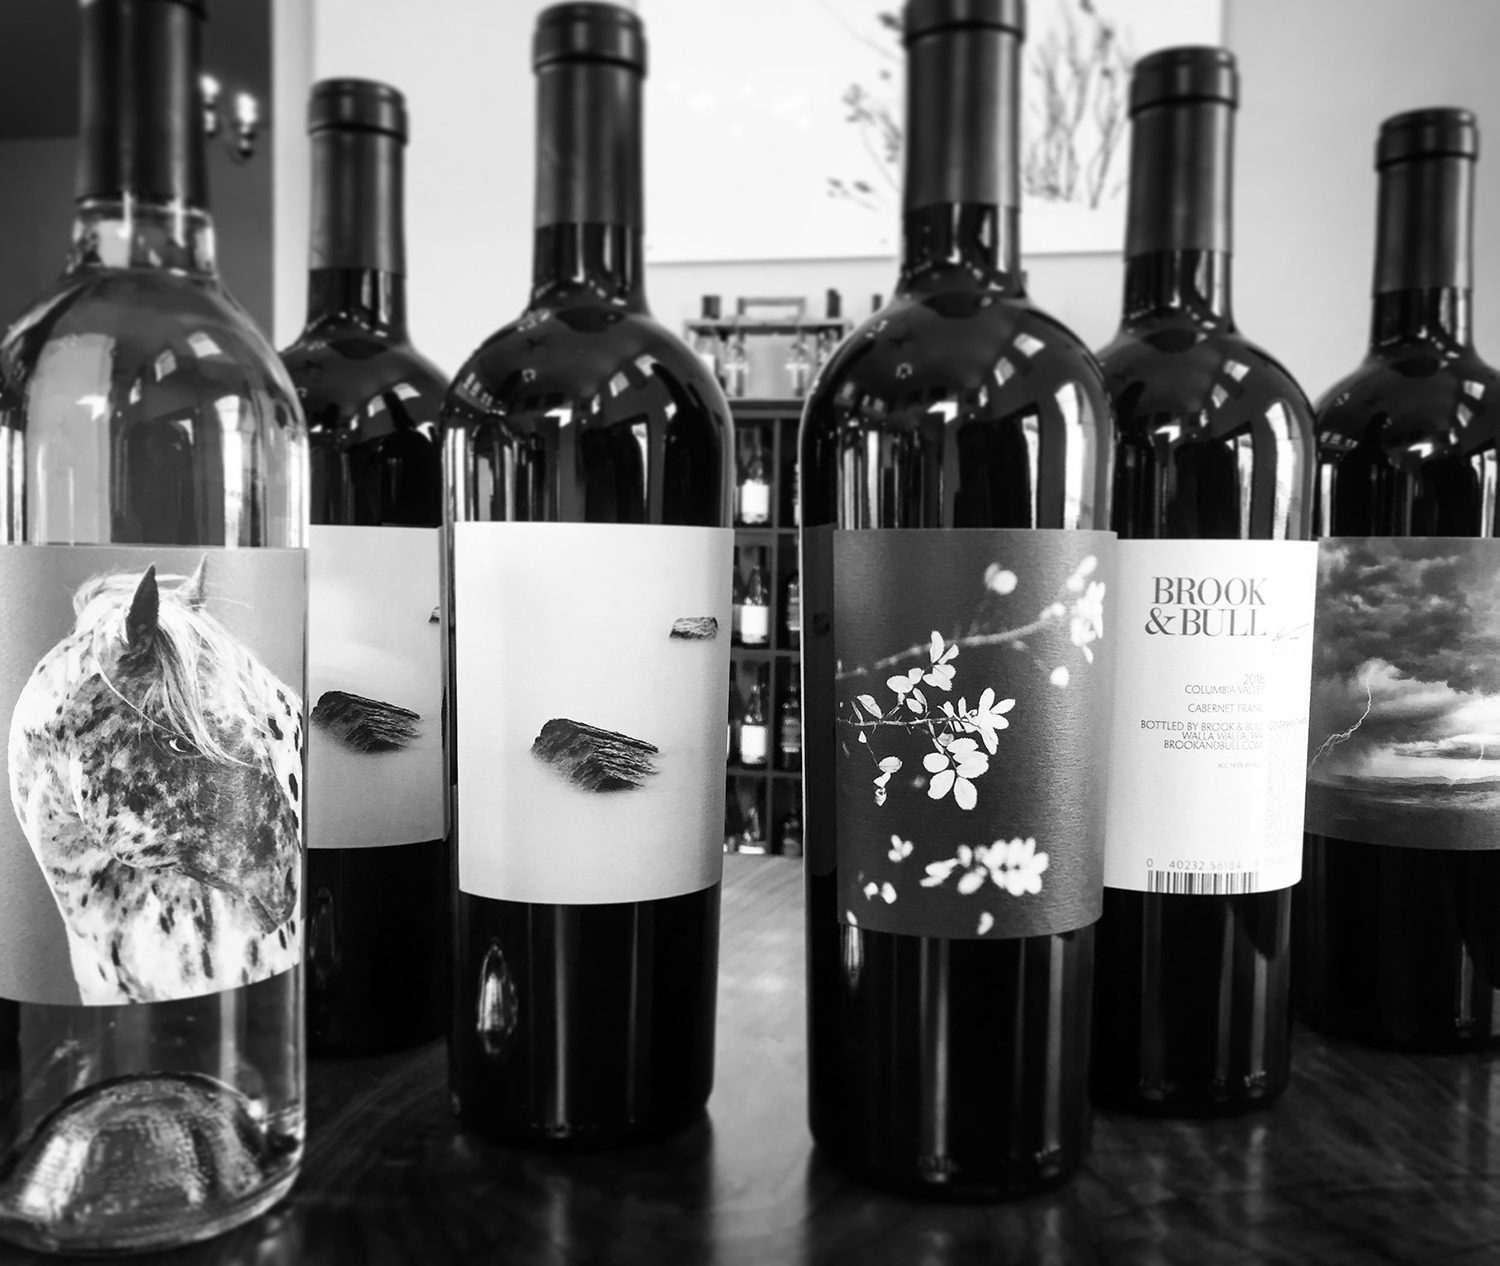 My black & white photos used on label for new wine